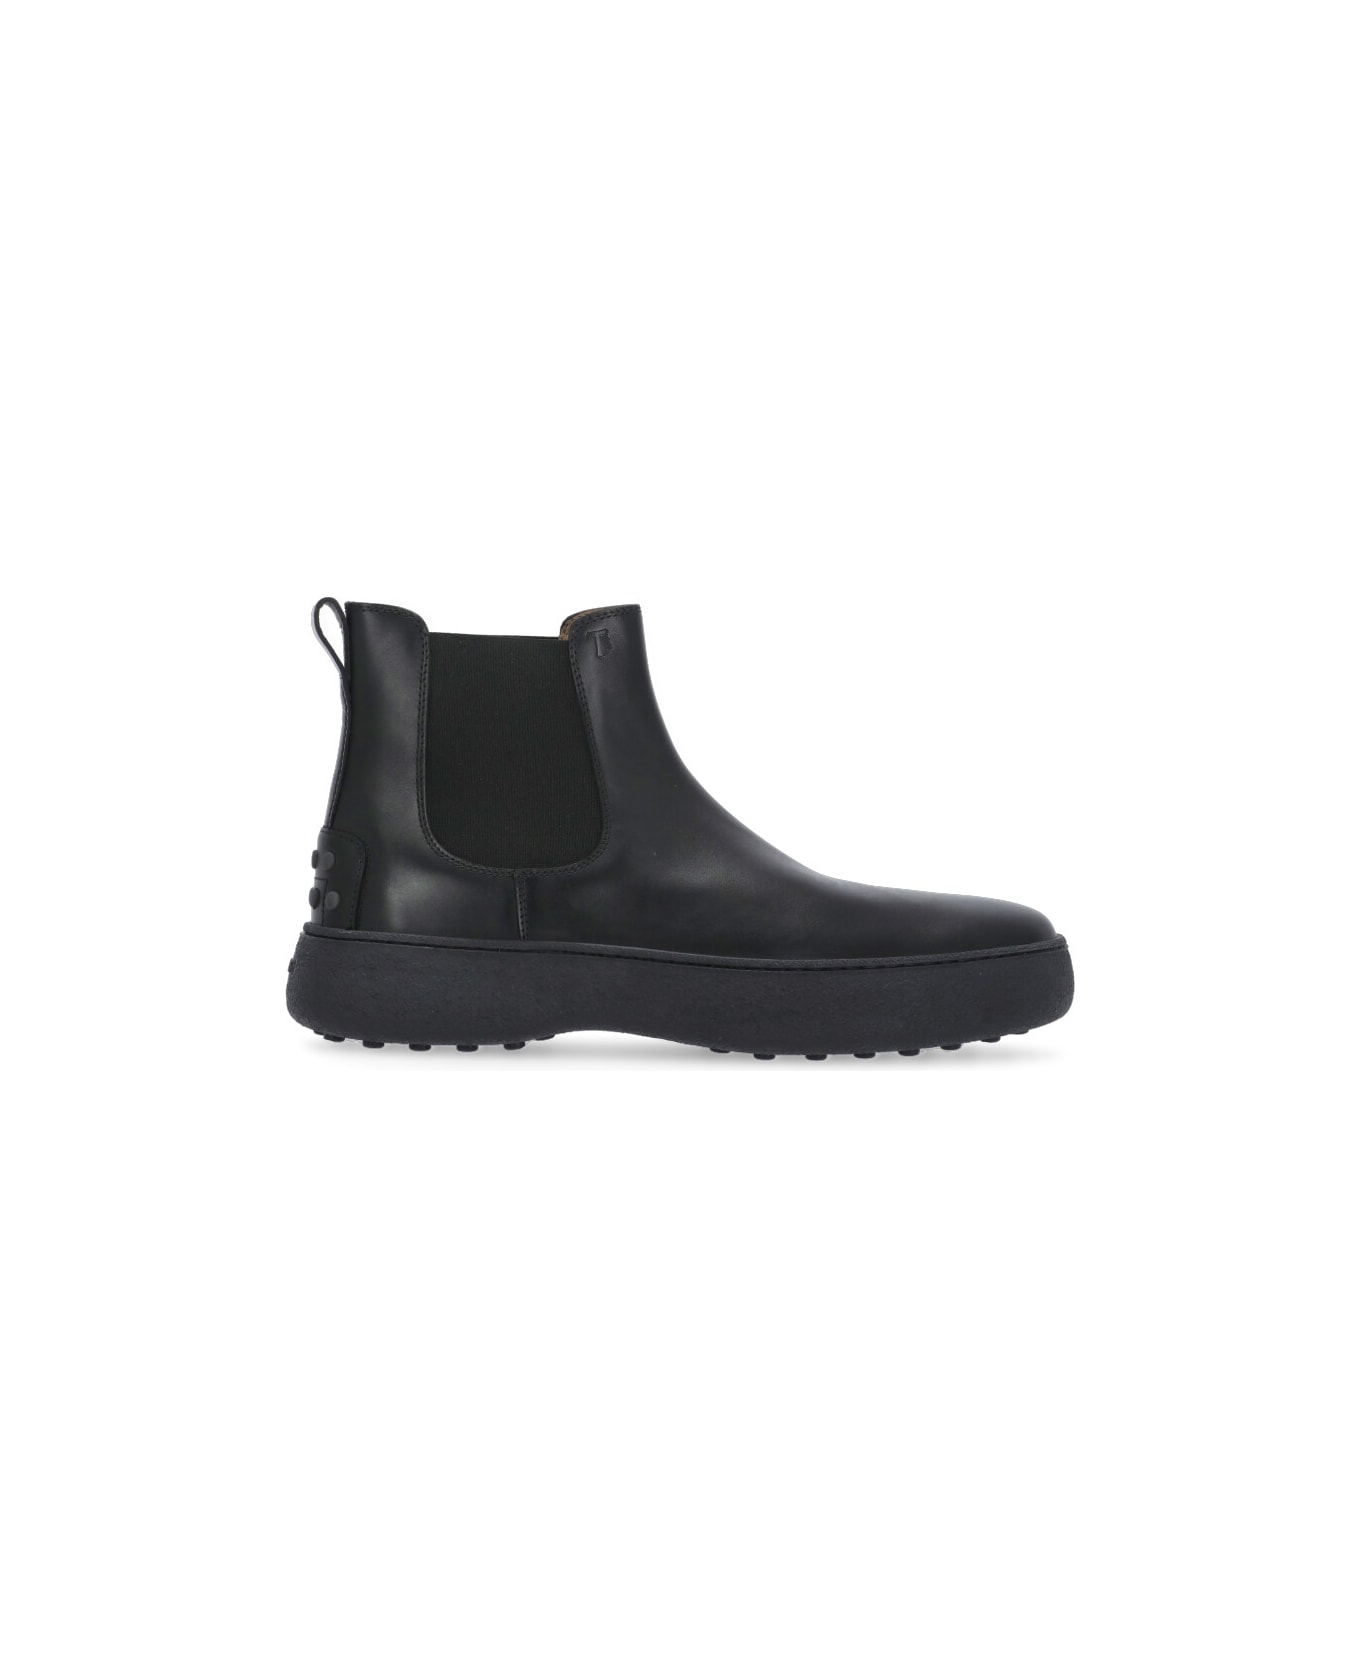 Tod's Ankle Boots - Black ブーツ